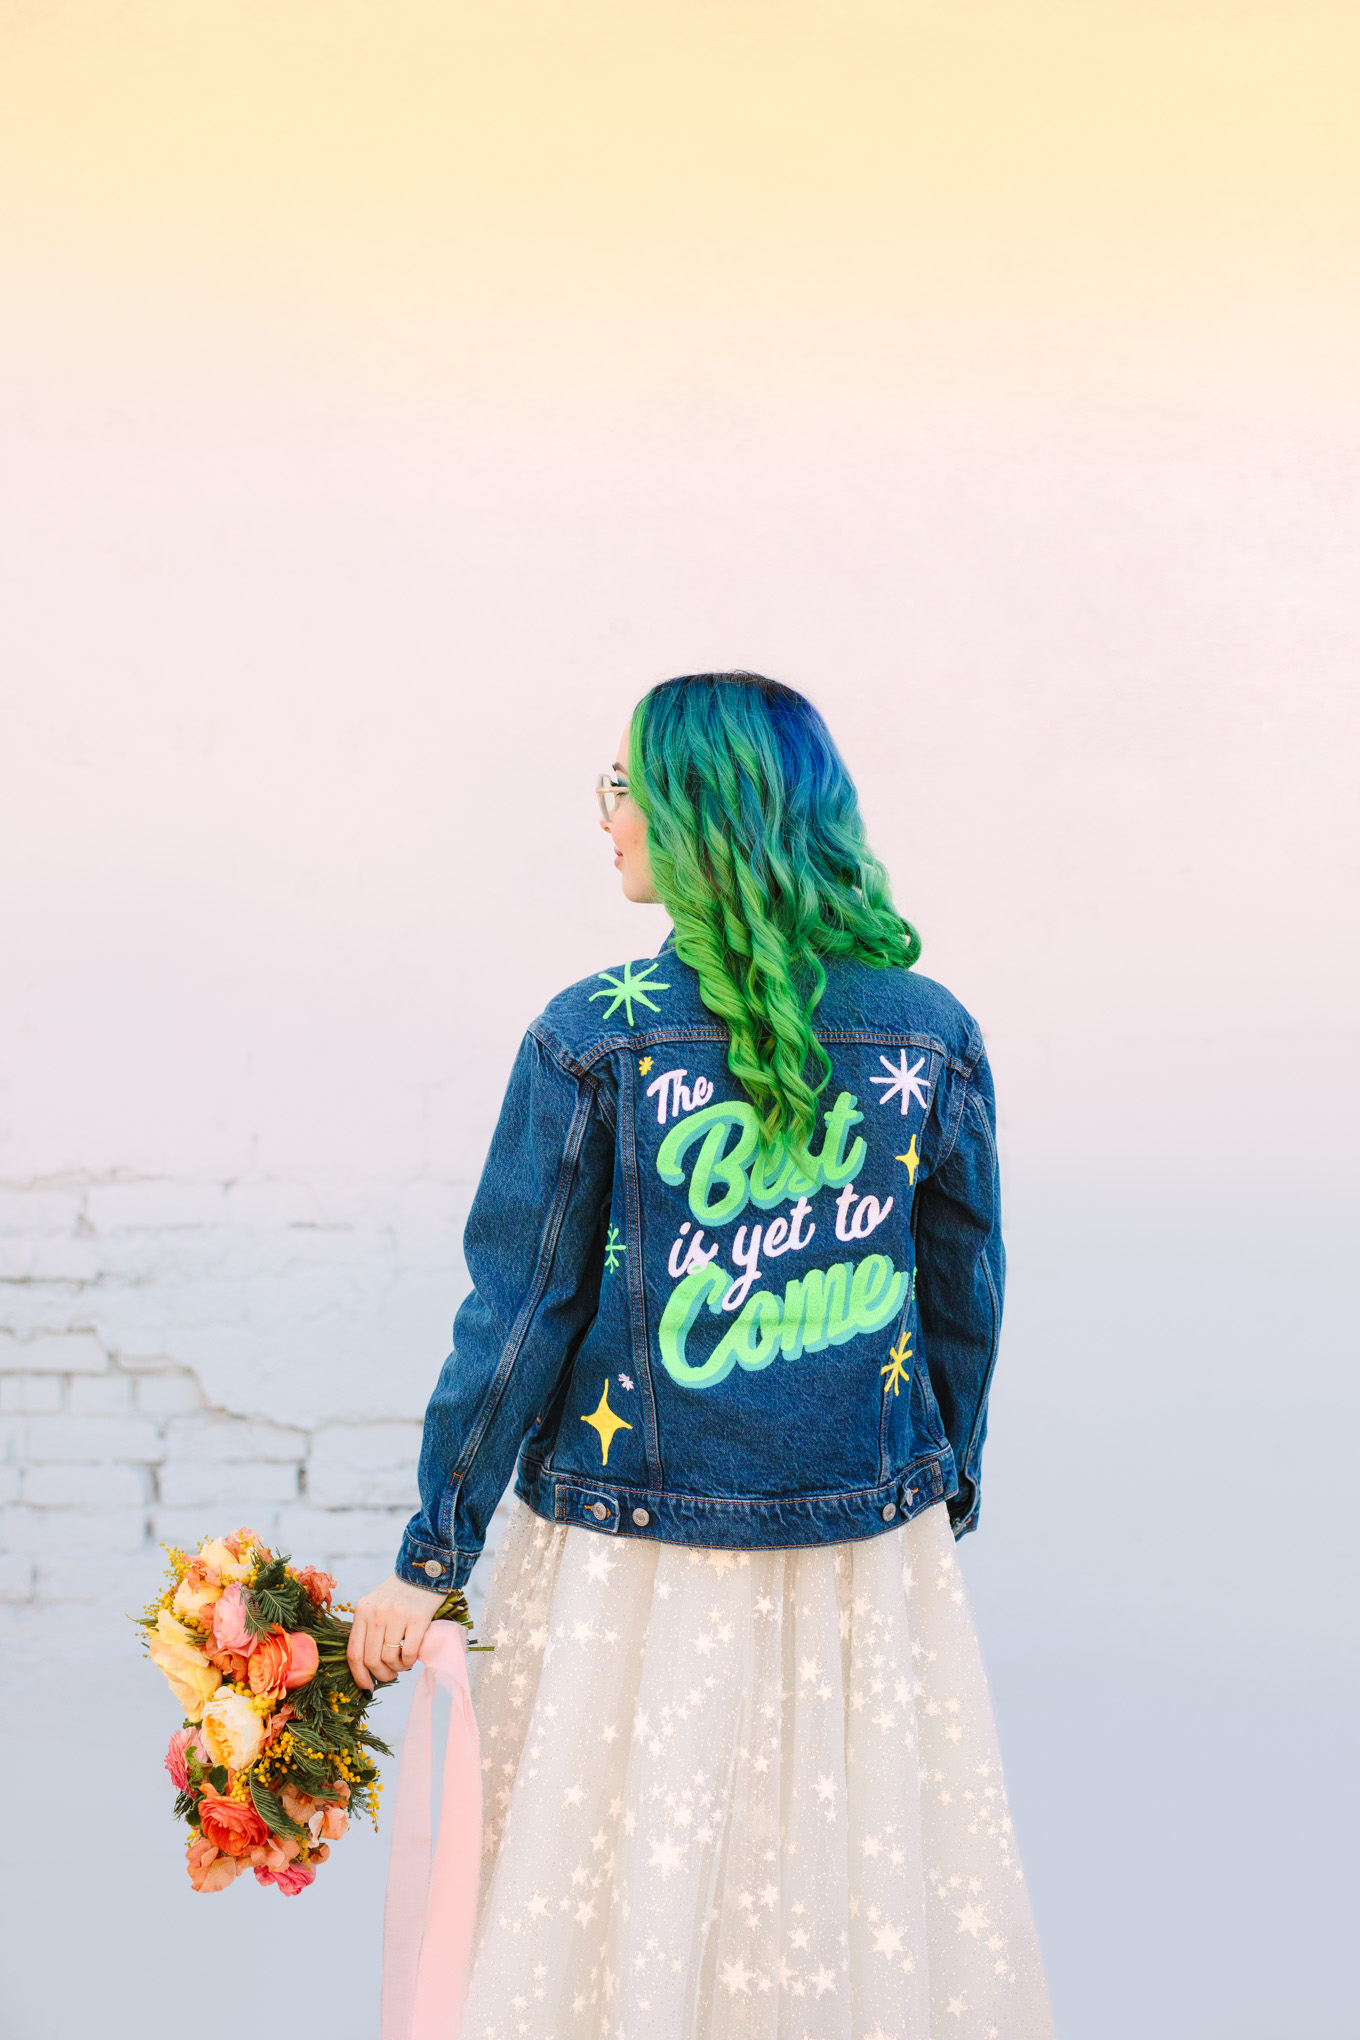 Bride with green ombre hair in custom denim jacket | Colorful wedding at The Unique Space Los Angeles published in The Knot Magazine | Fresh and colorful photography for fun-loving couples in Southern California | #colorfulwedding #losangeleswedding #weddingphotography #uniquespace Source: Mary Costa Photography | Los Angeles